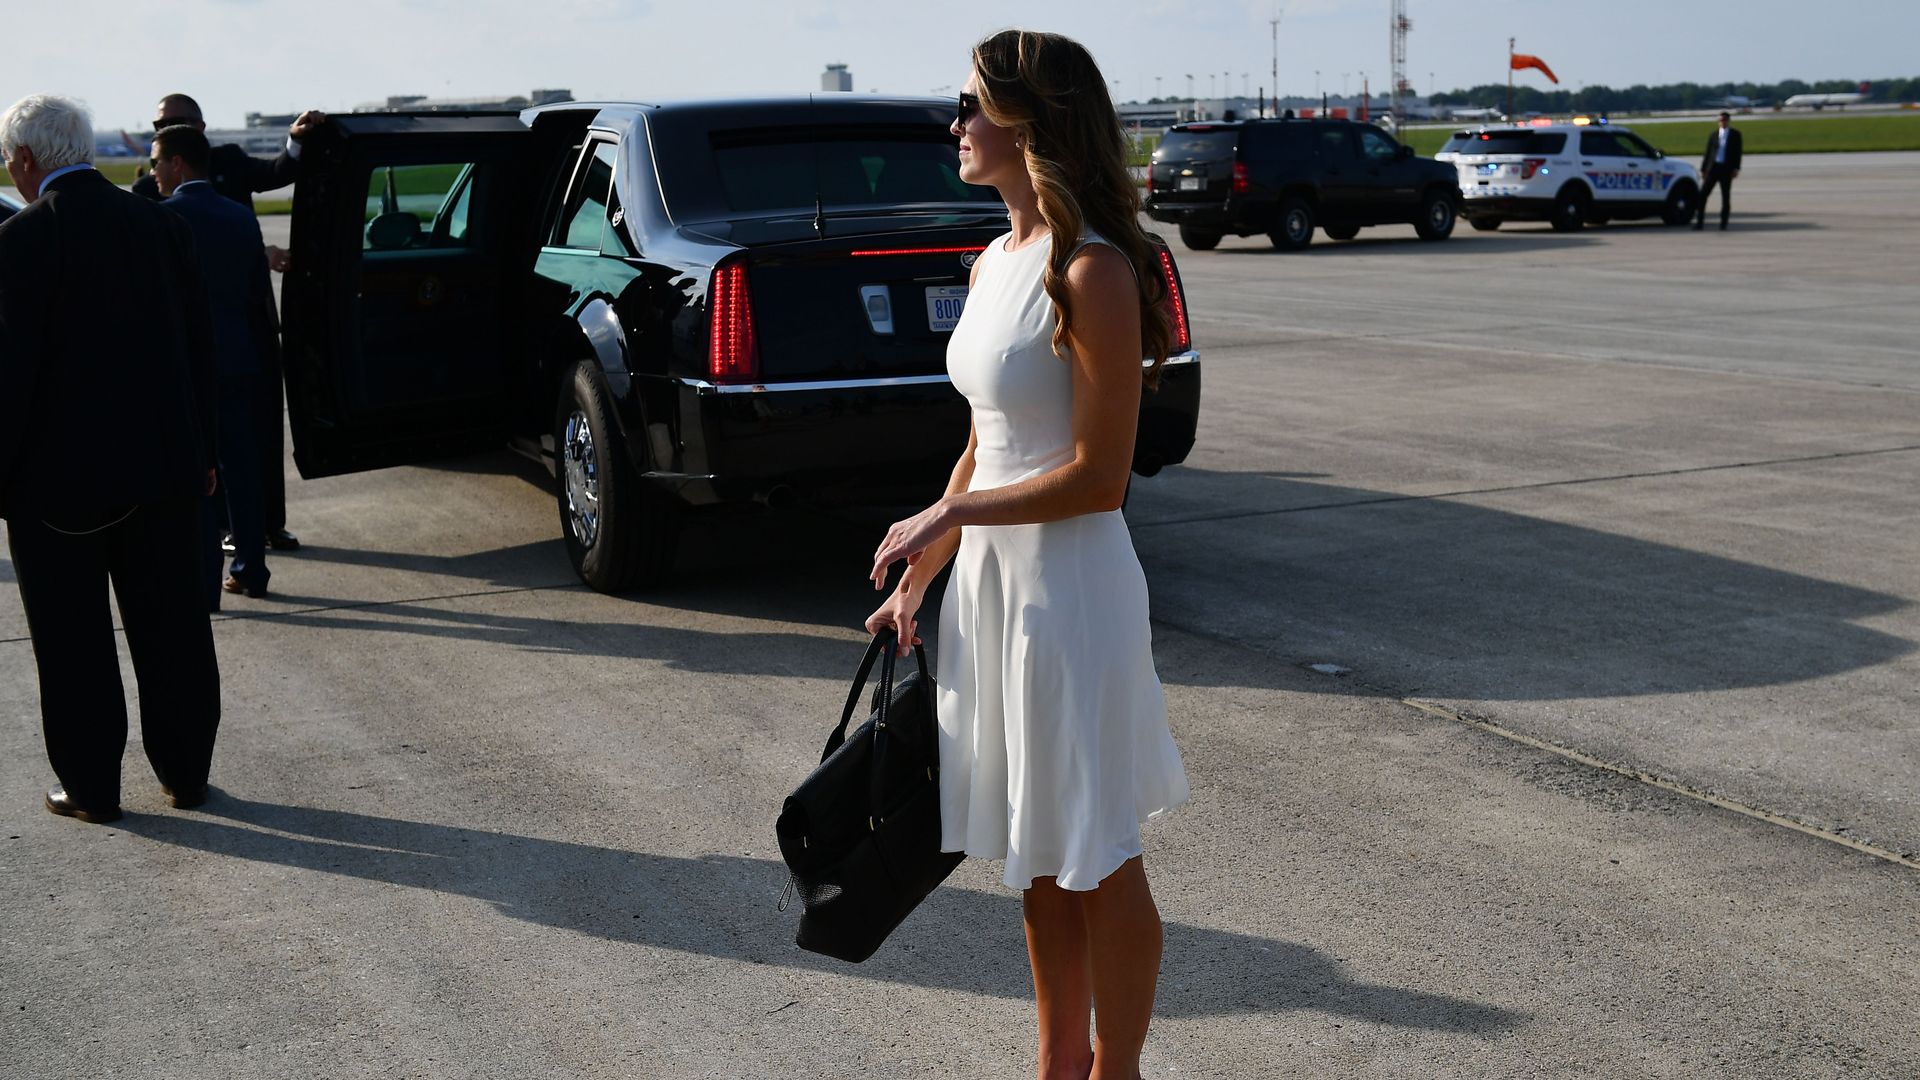 Hope Hicks stands outside wearing a white dress, heels and sunglasses